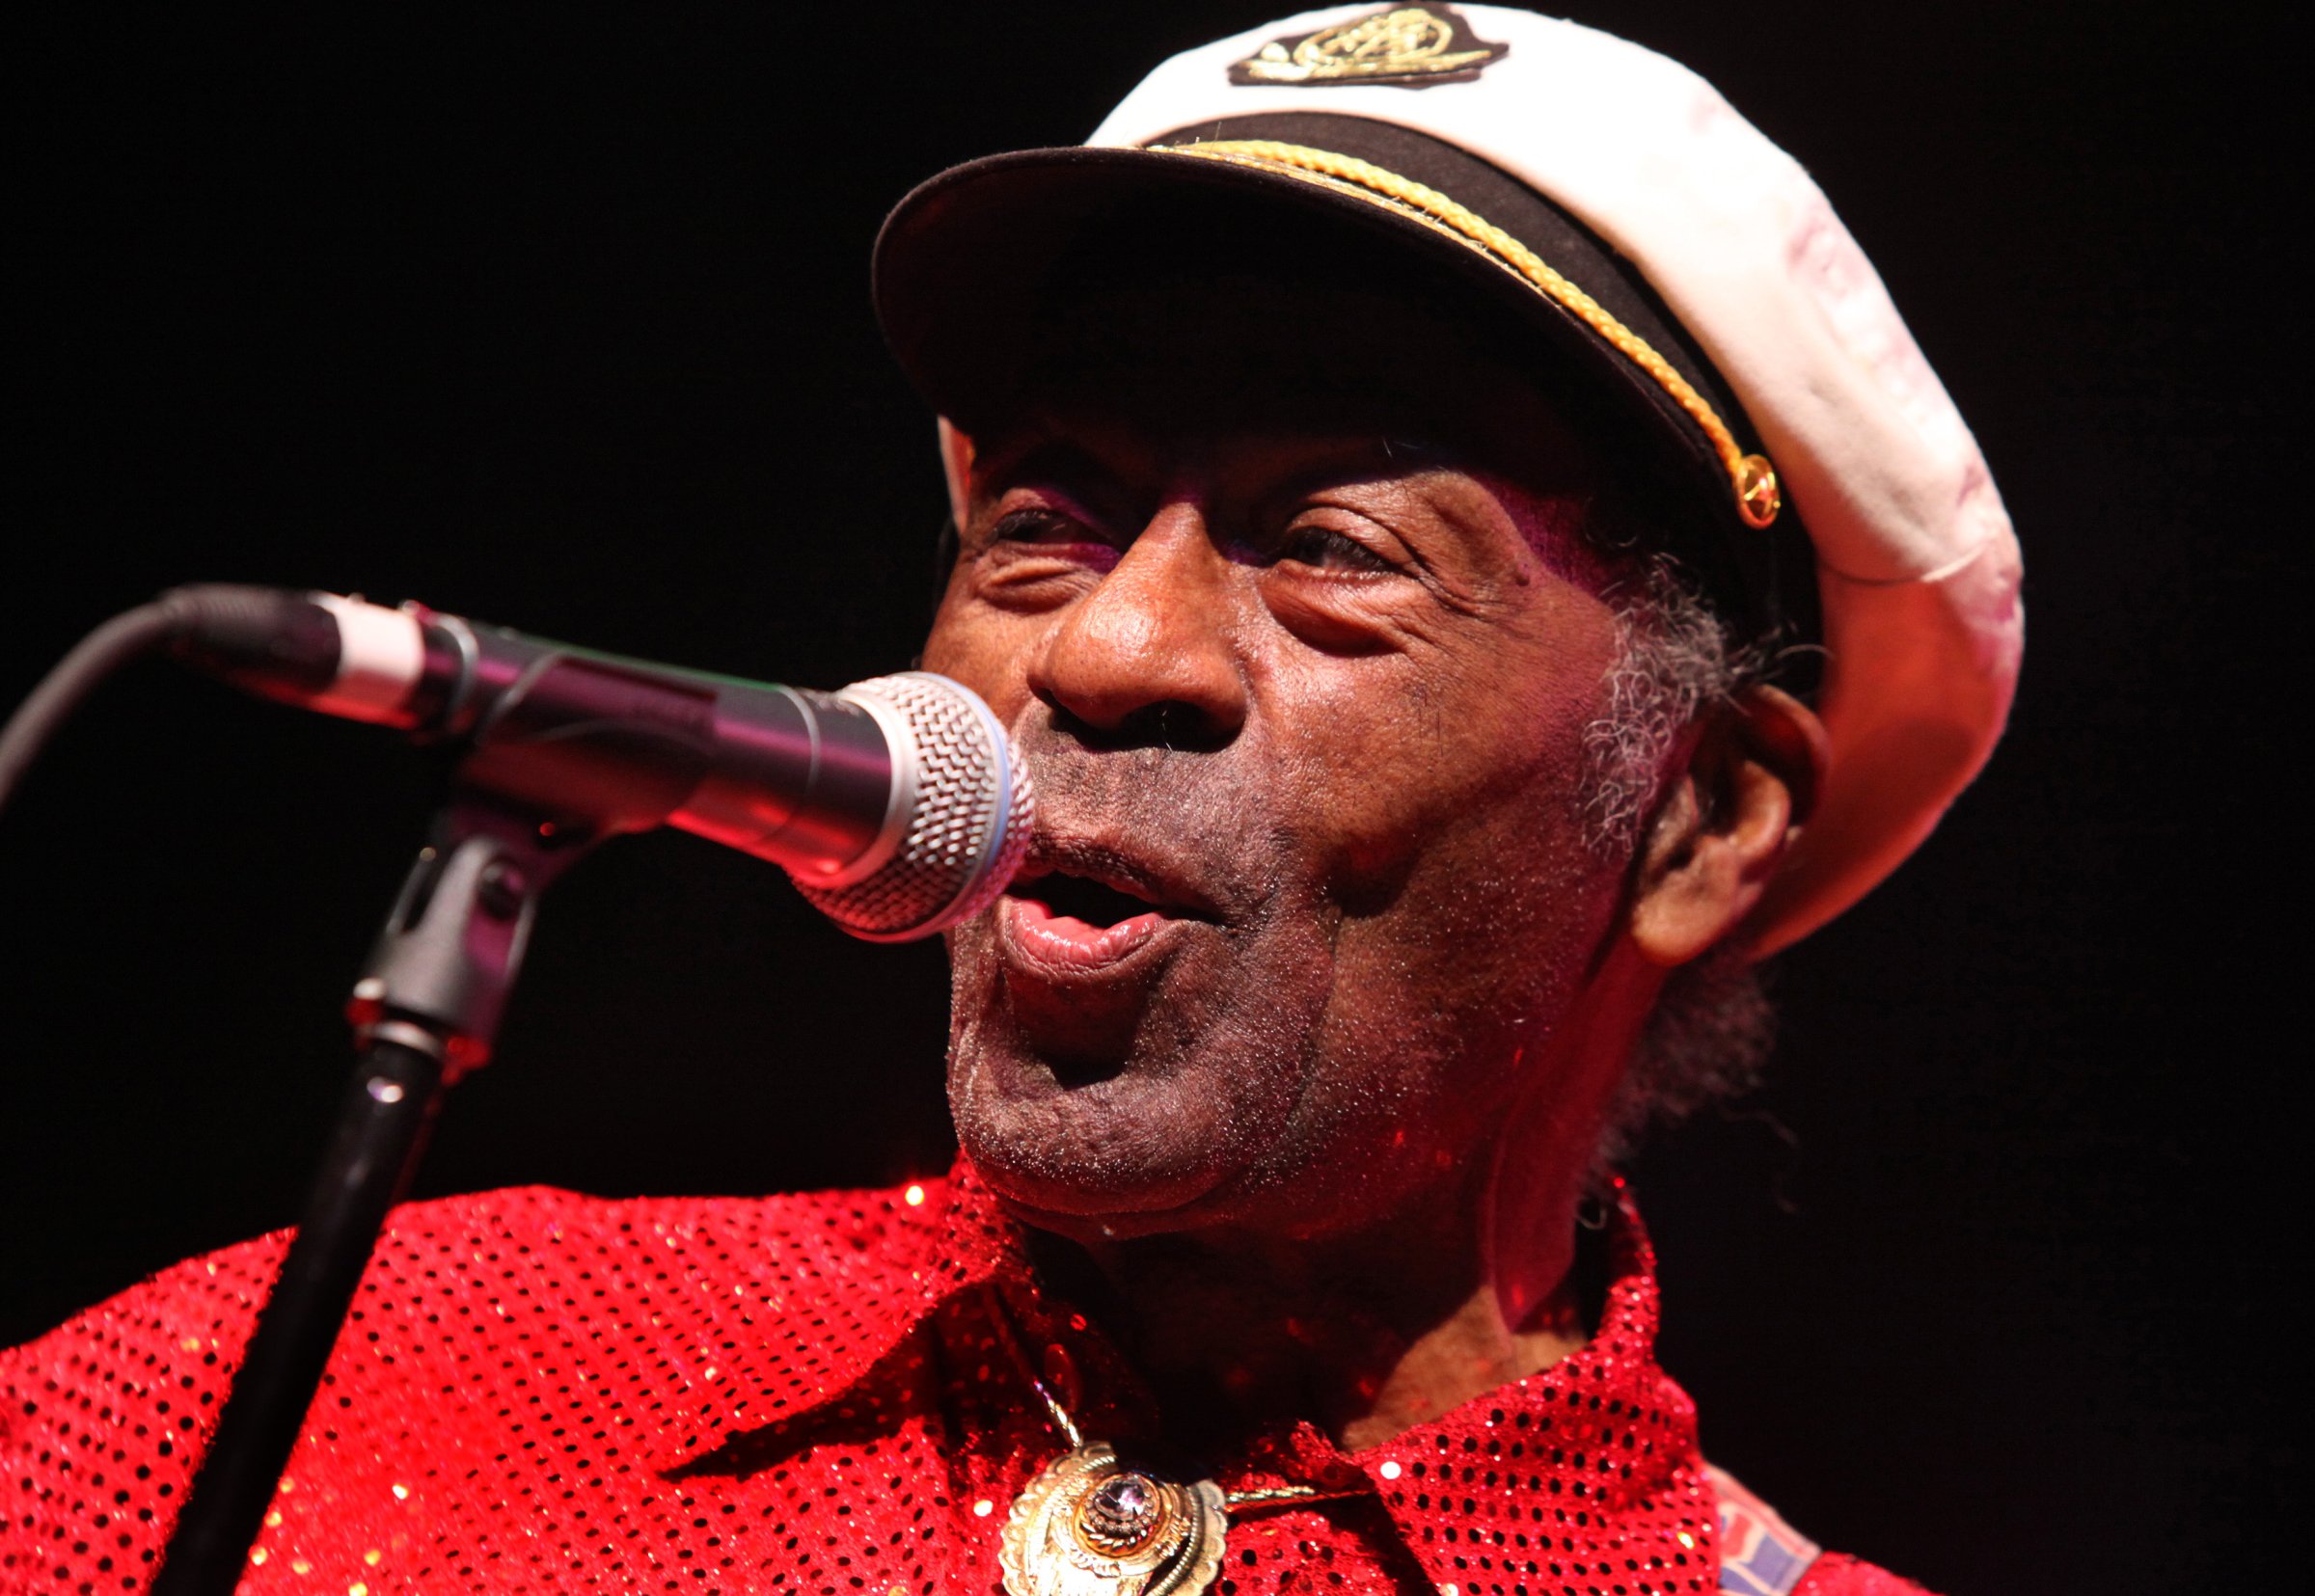 Chuck Berry In Concert - January 1, 2011